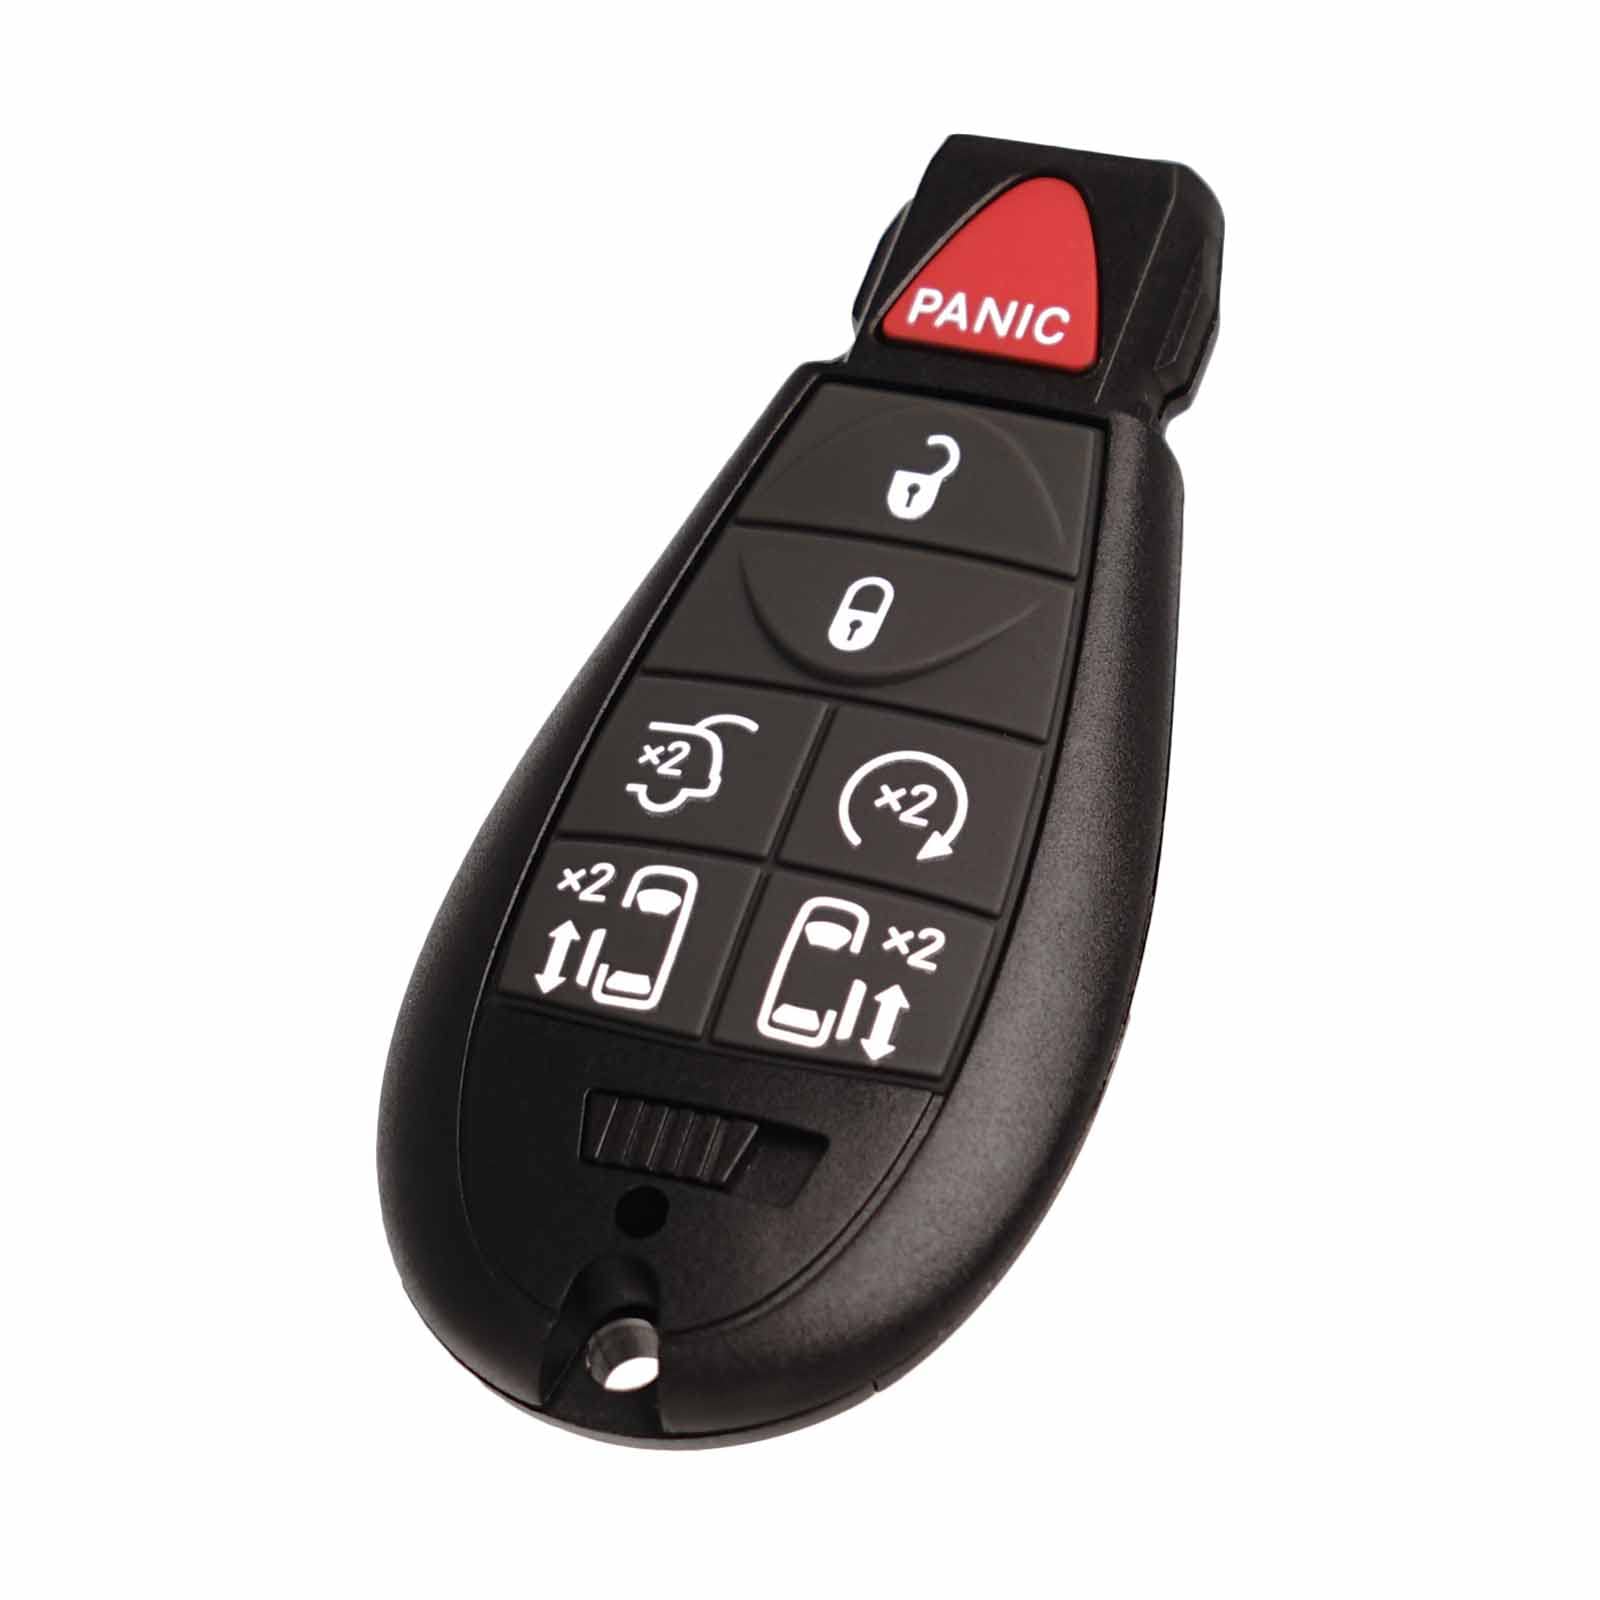 Keyless Entry Remote Control Key Fob FOBIK Replacement Fits for Dodge Grand Caravan 2008-2020 Chrysler Town Country Volkswagen Routan IYZ-C01C M3N5WY783X 56046709